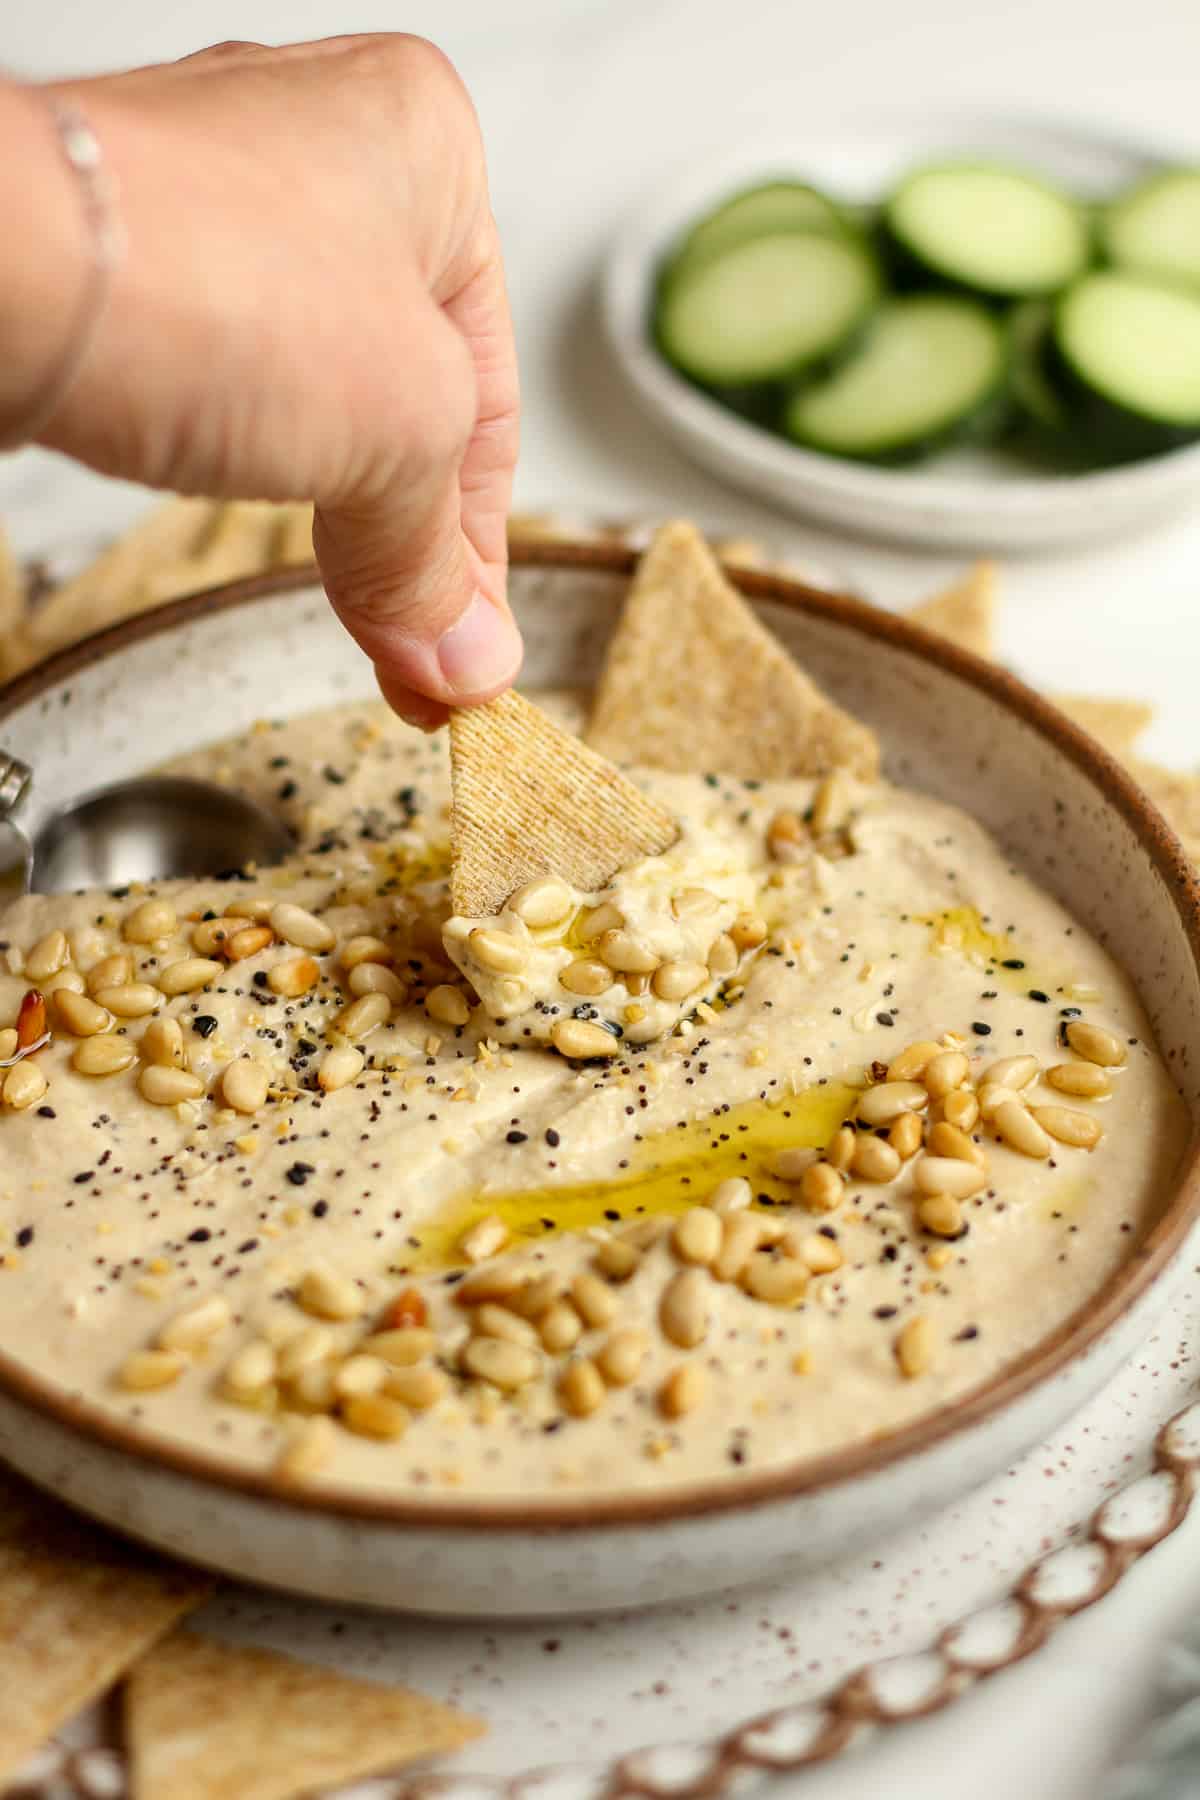 Side shot of my hand dipping a cracker in a toasted pine nut hummus bowl.